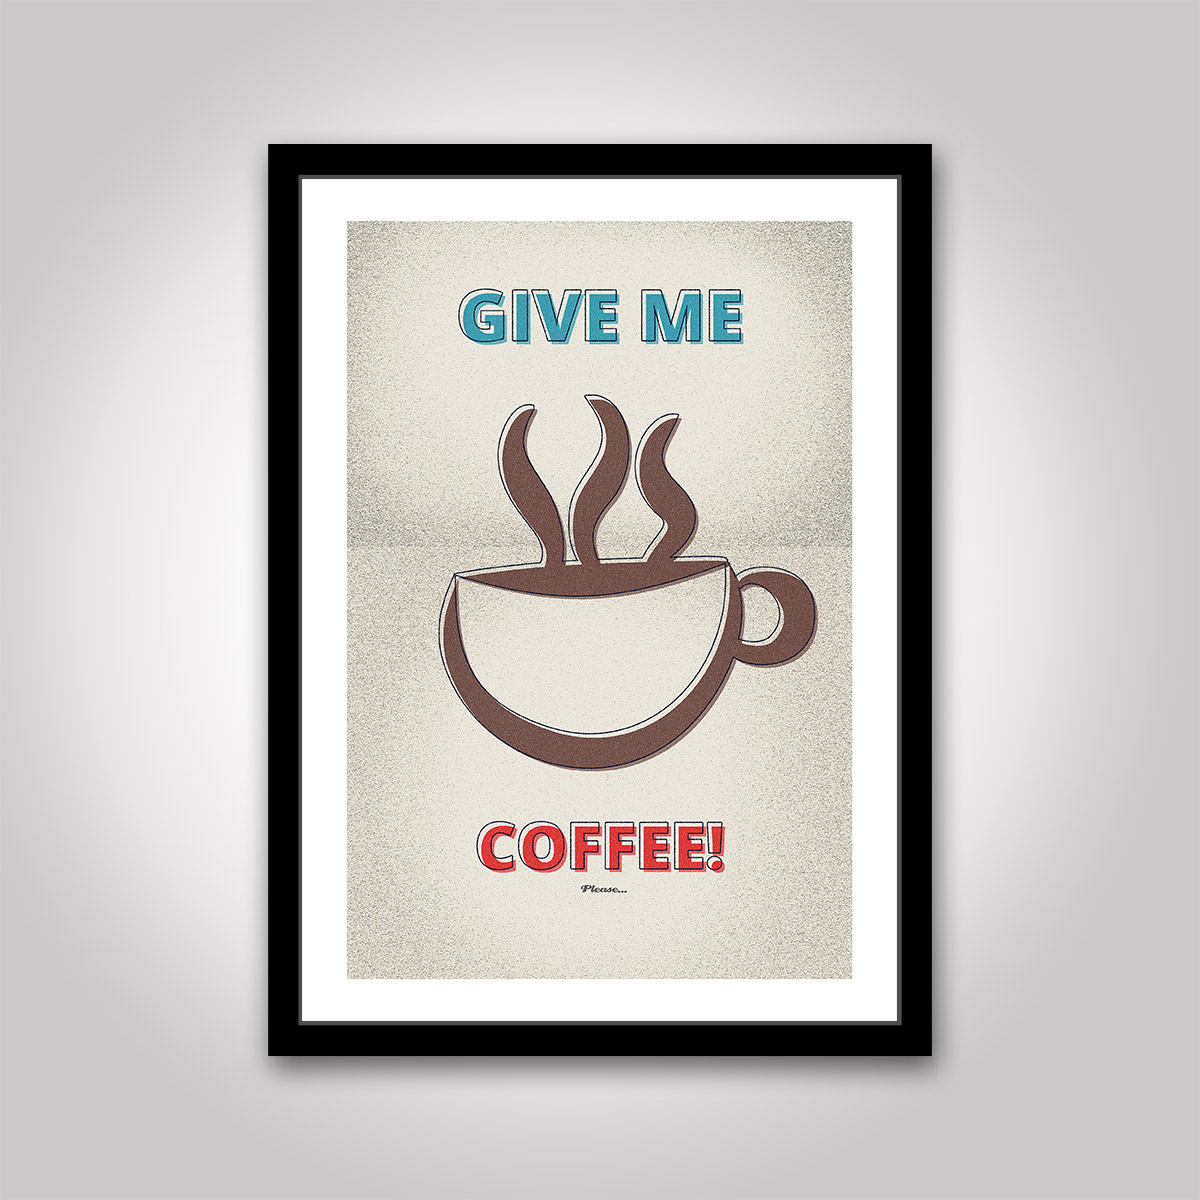 Give me coffee! Please... poster